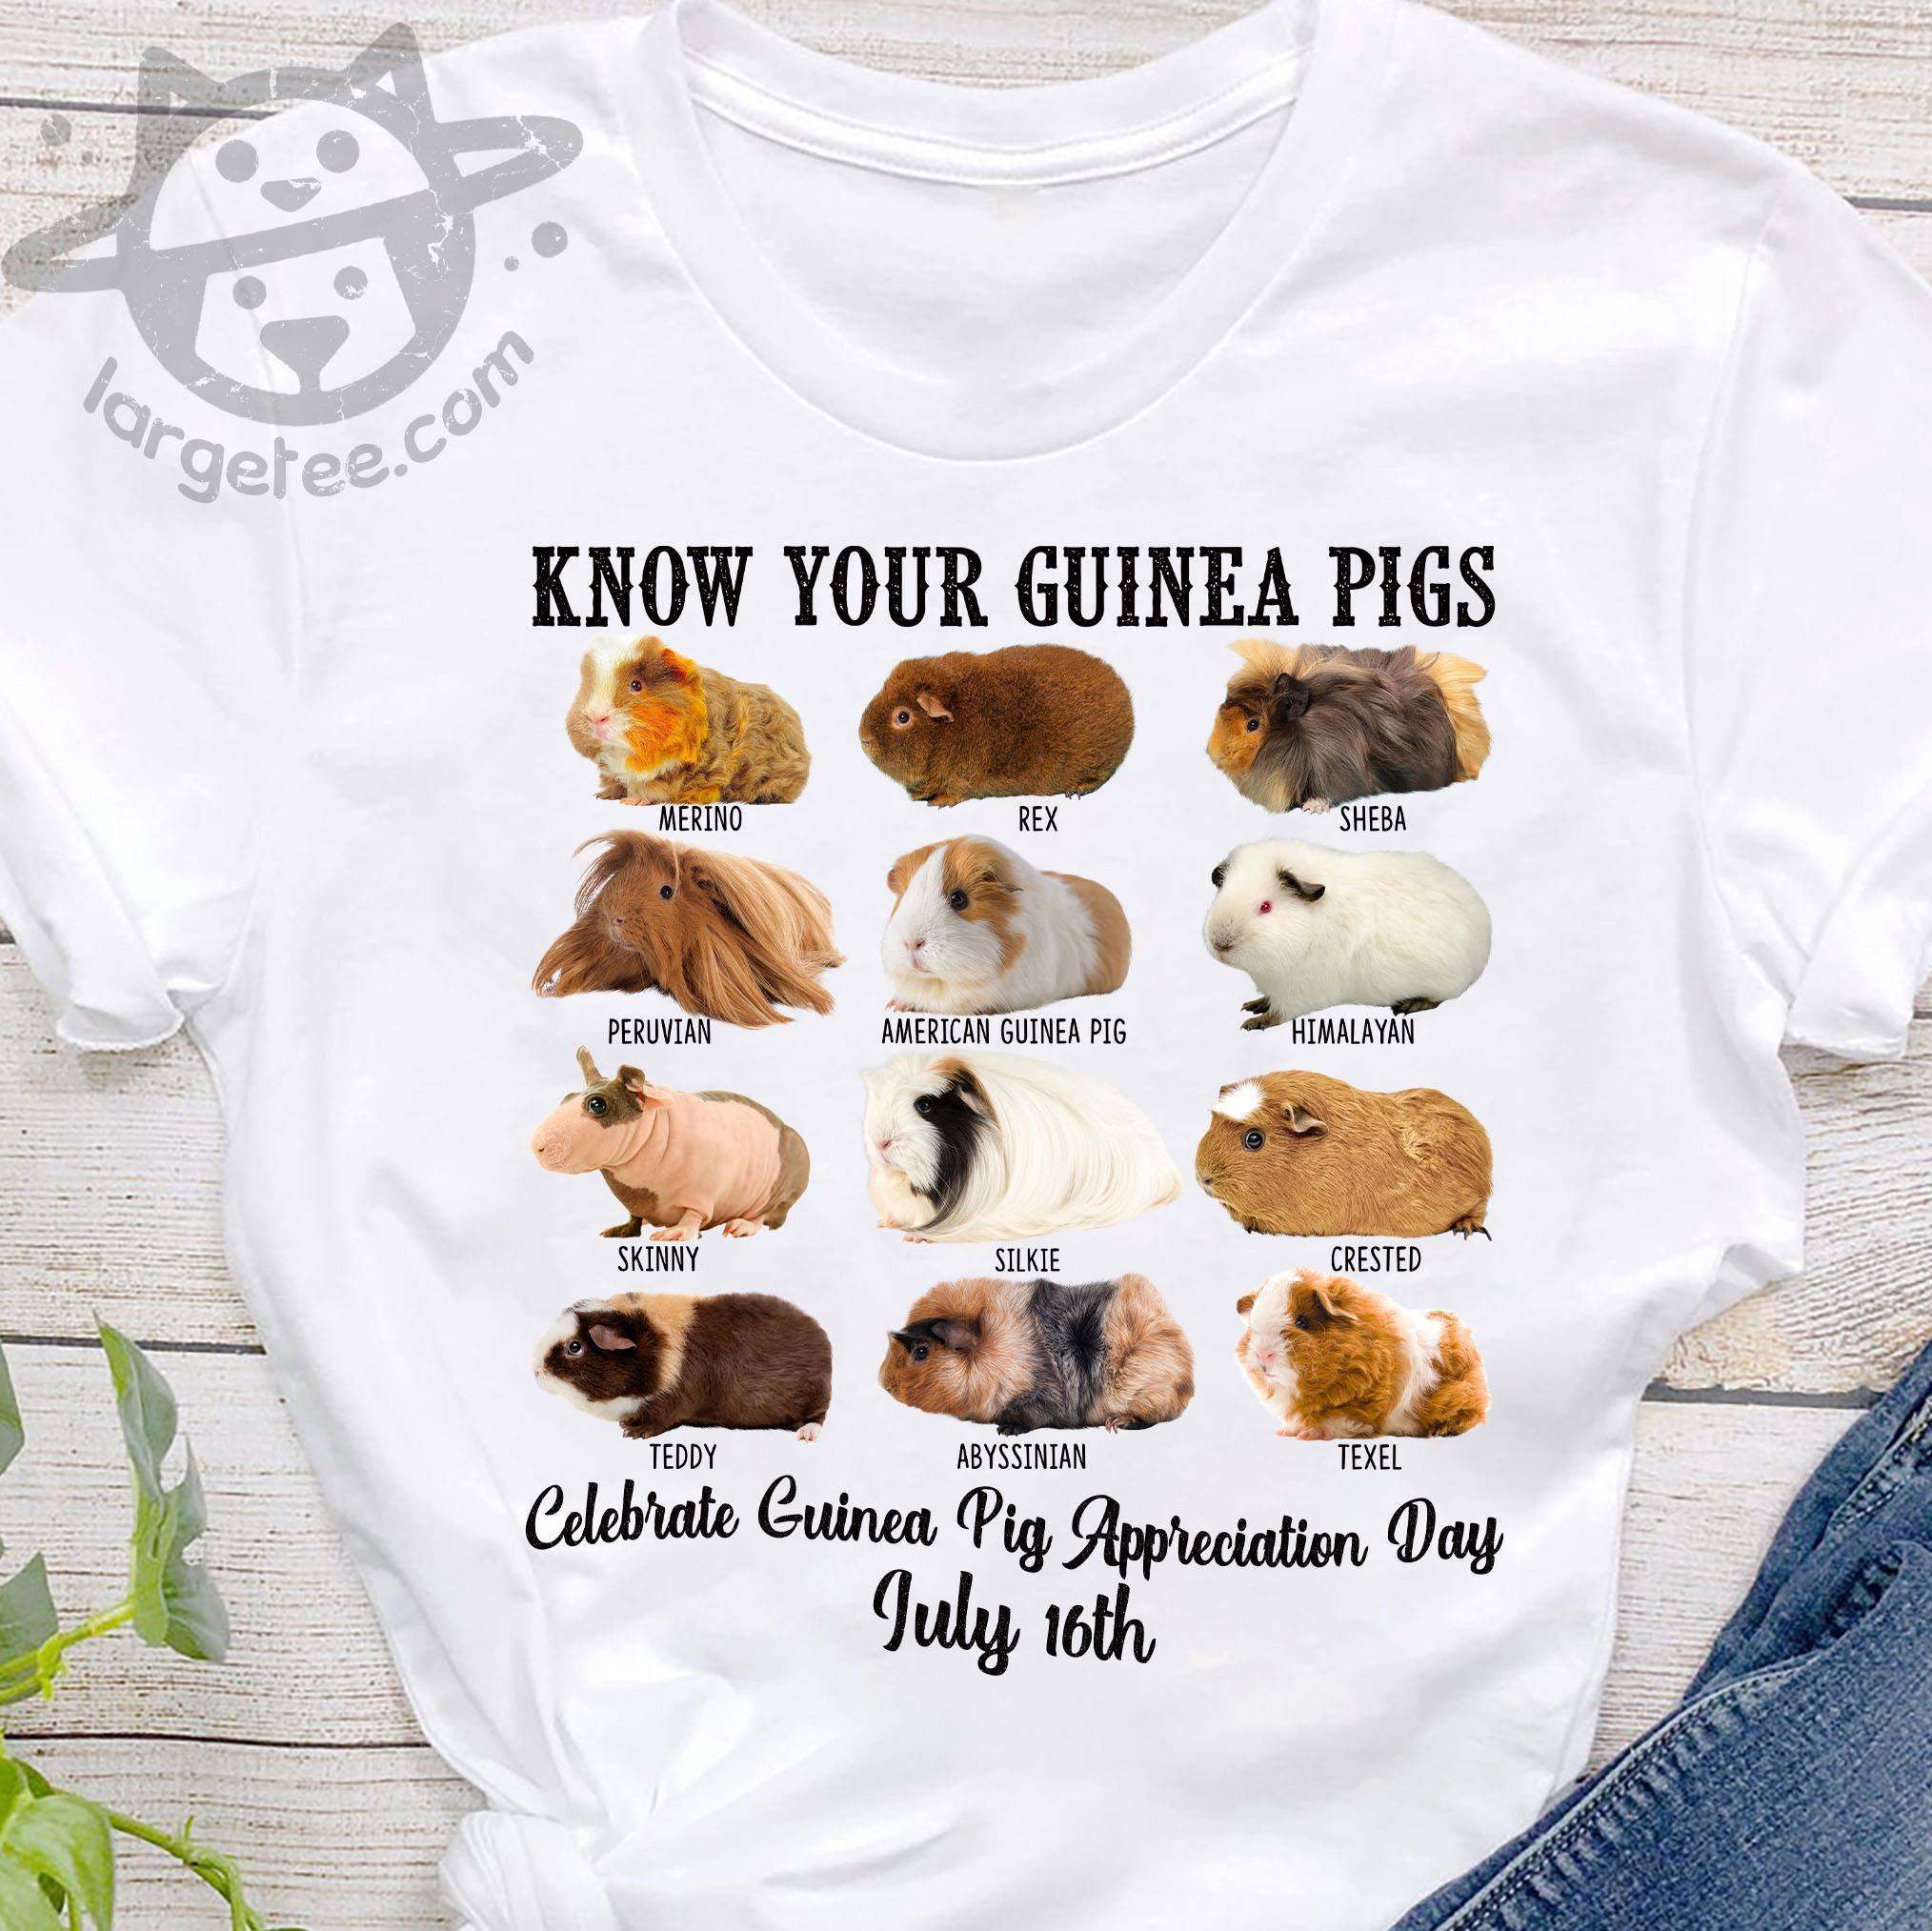 Guinea Pigs - Know your guinea pigs Celbrate guinea pig appreciantion day July 16th